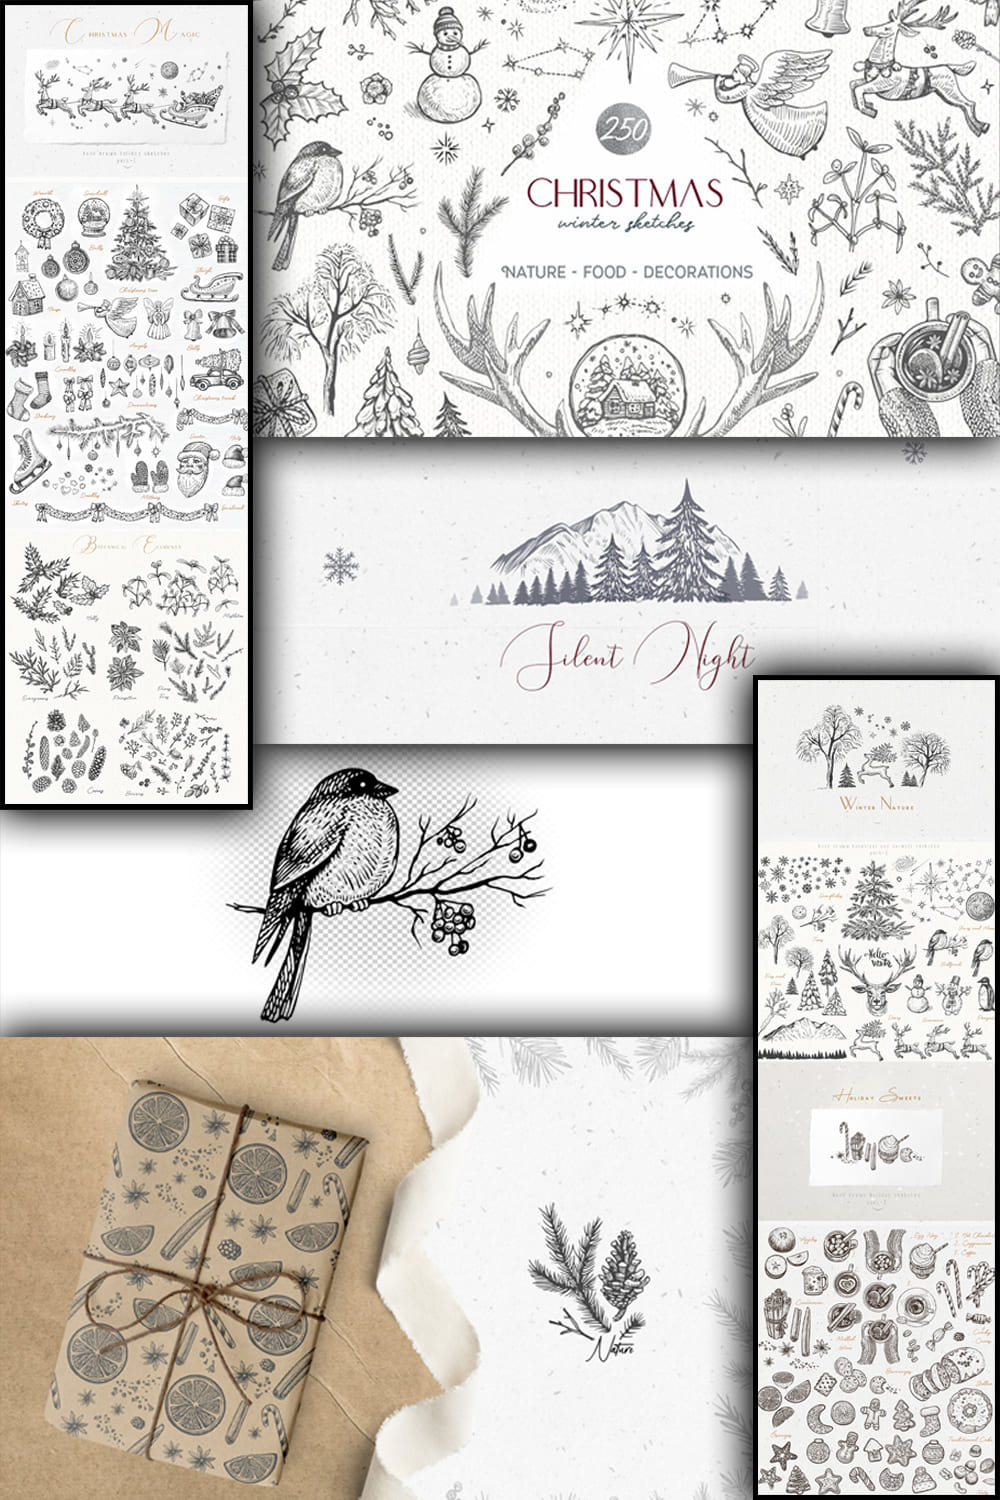 Christmas winter sketches vector images of pinterest.